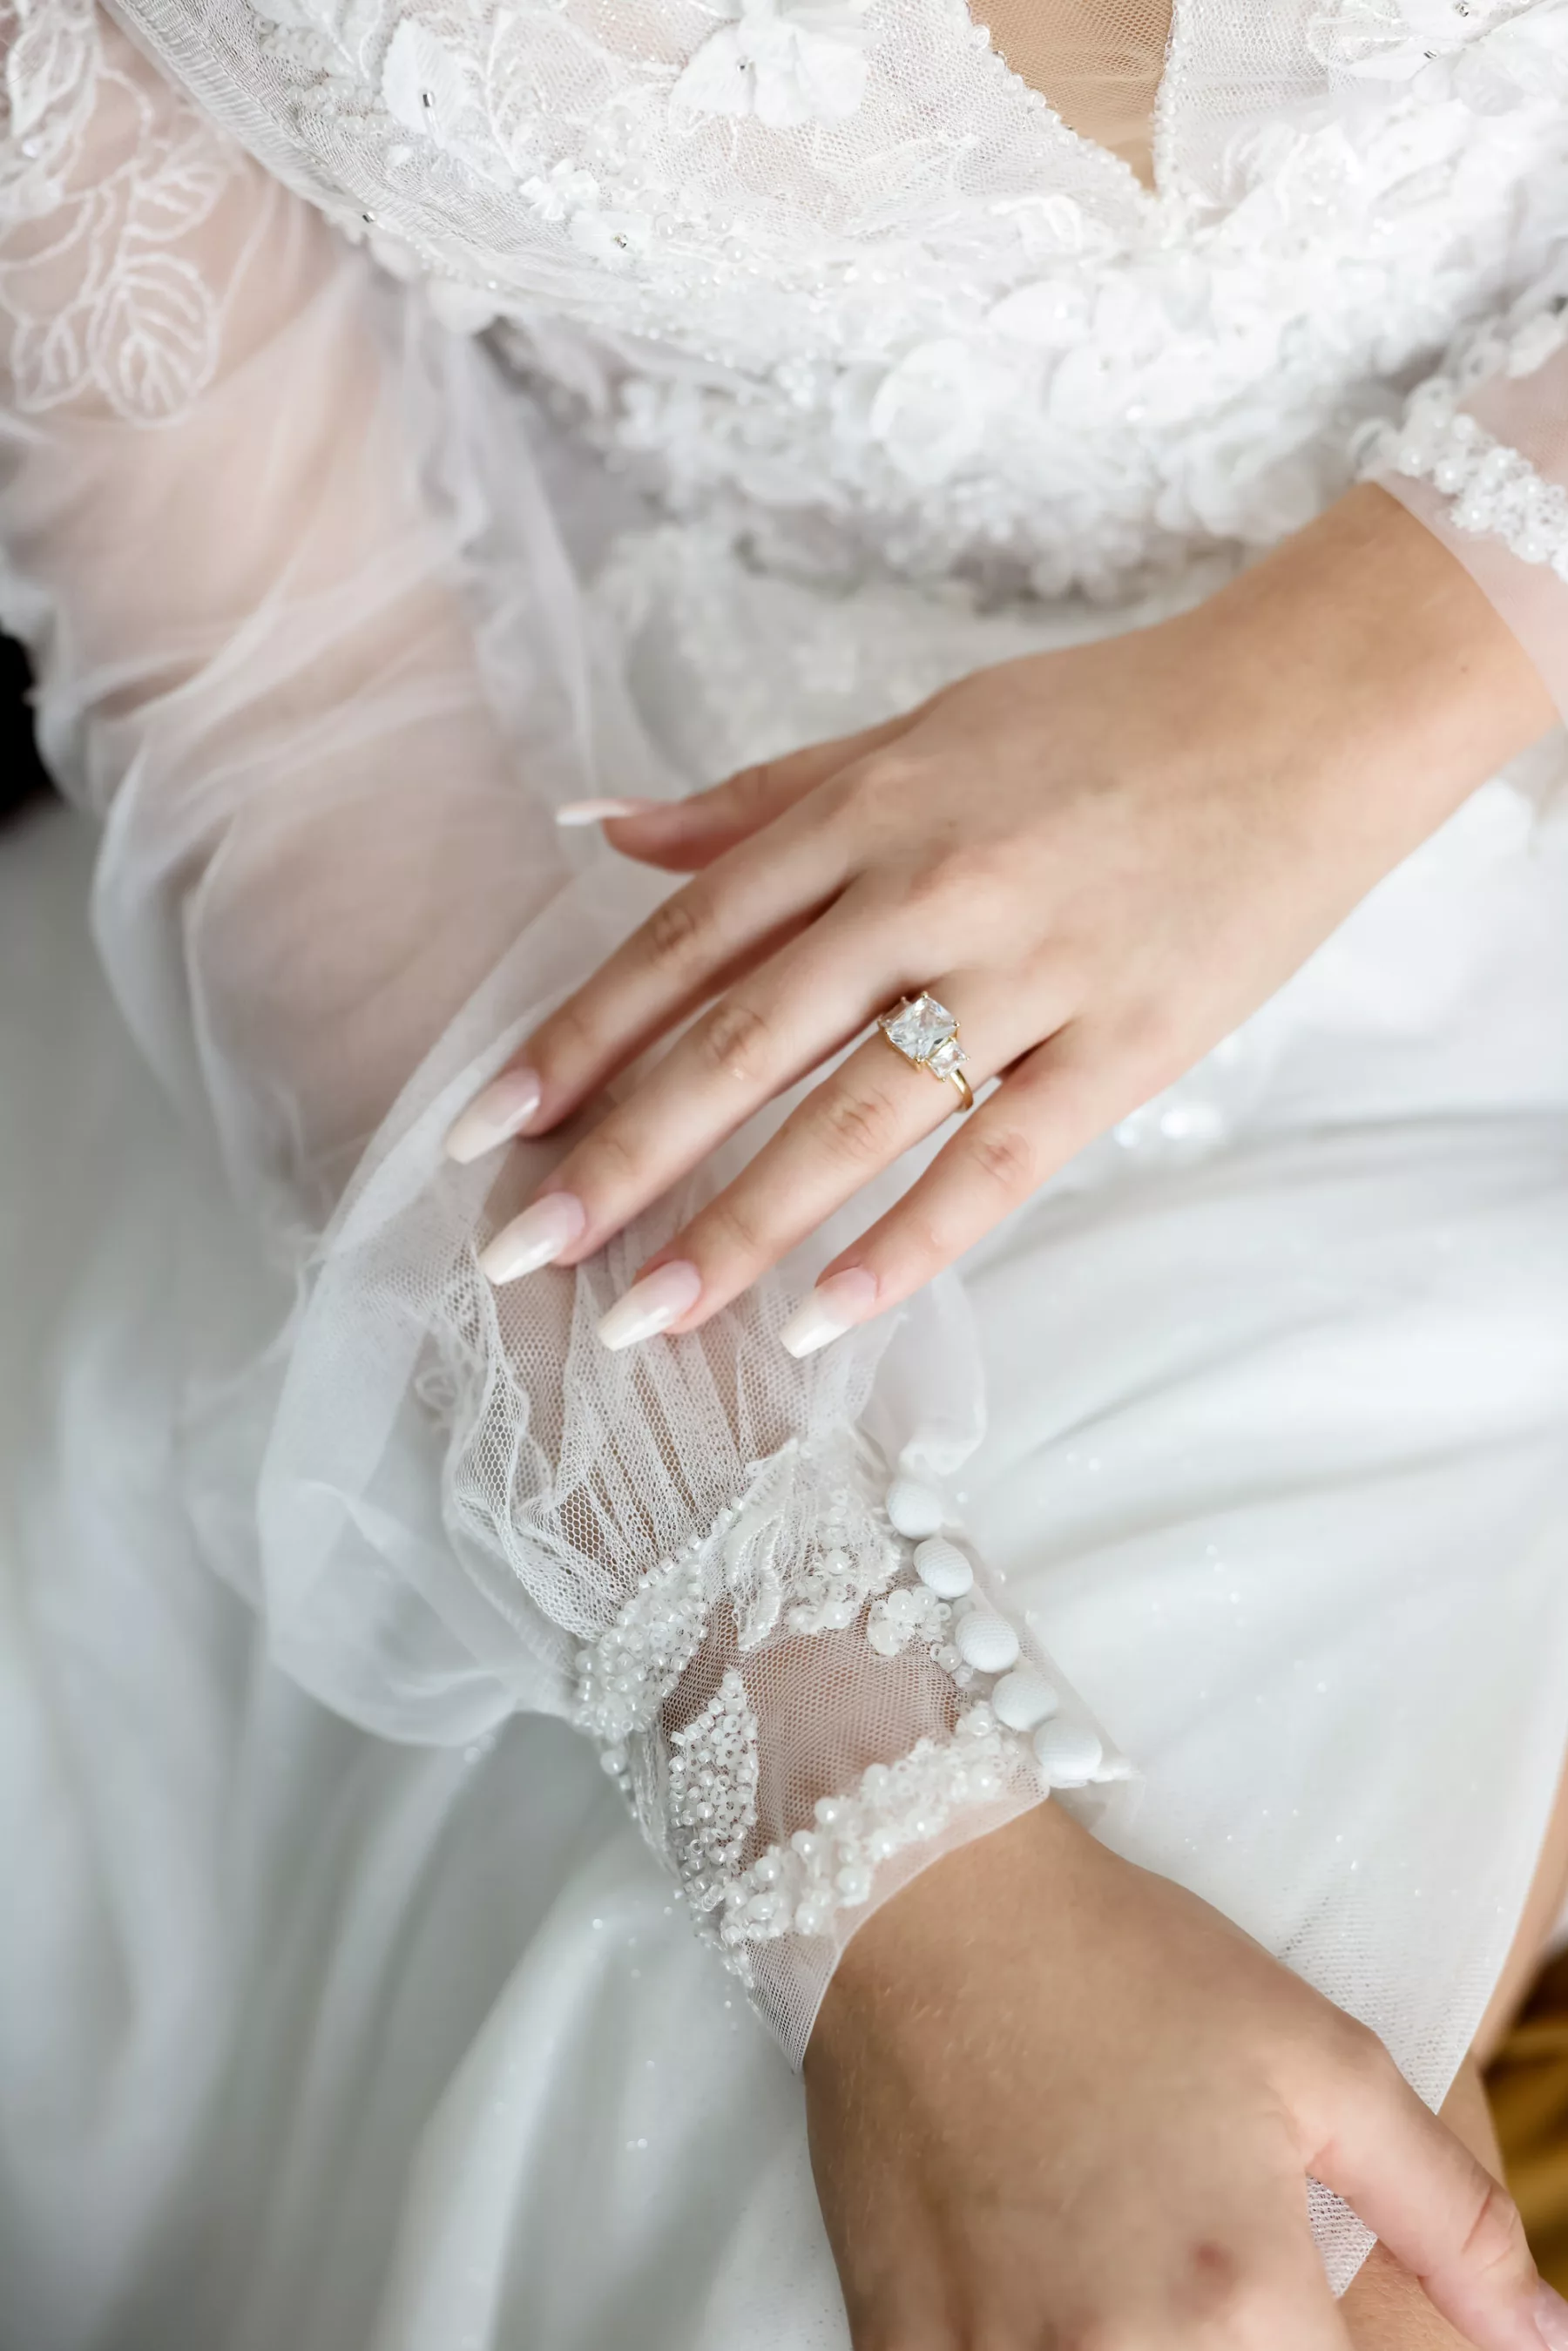 Emerald Diamond Engagement Ring Inspiration | White Lace and Tulle Wedding Dress with Sleeves Ideas | Boutique Truly Forever Bridal Tampa